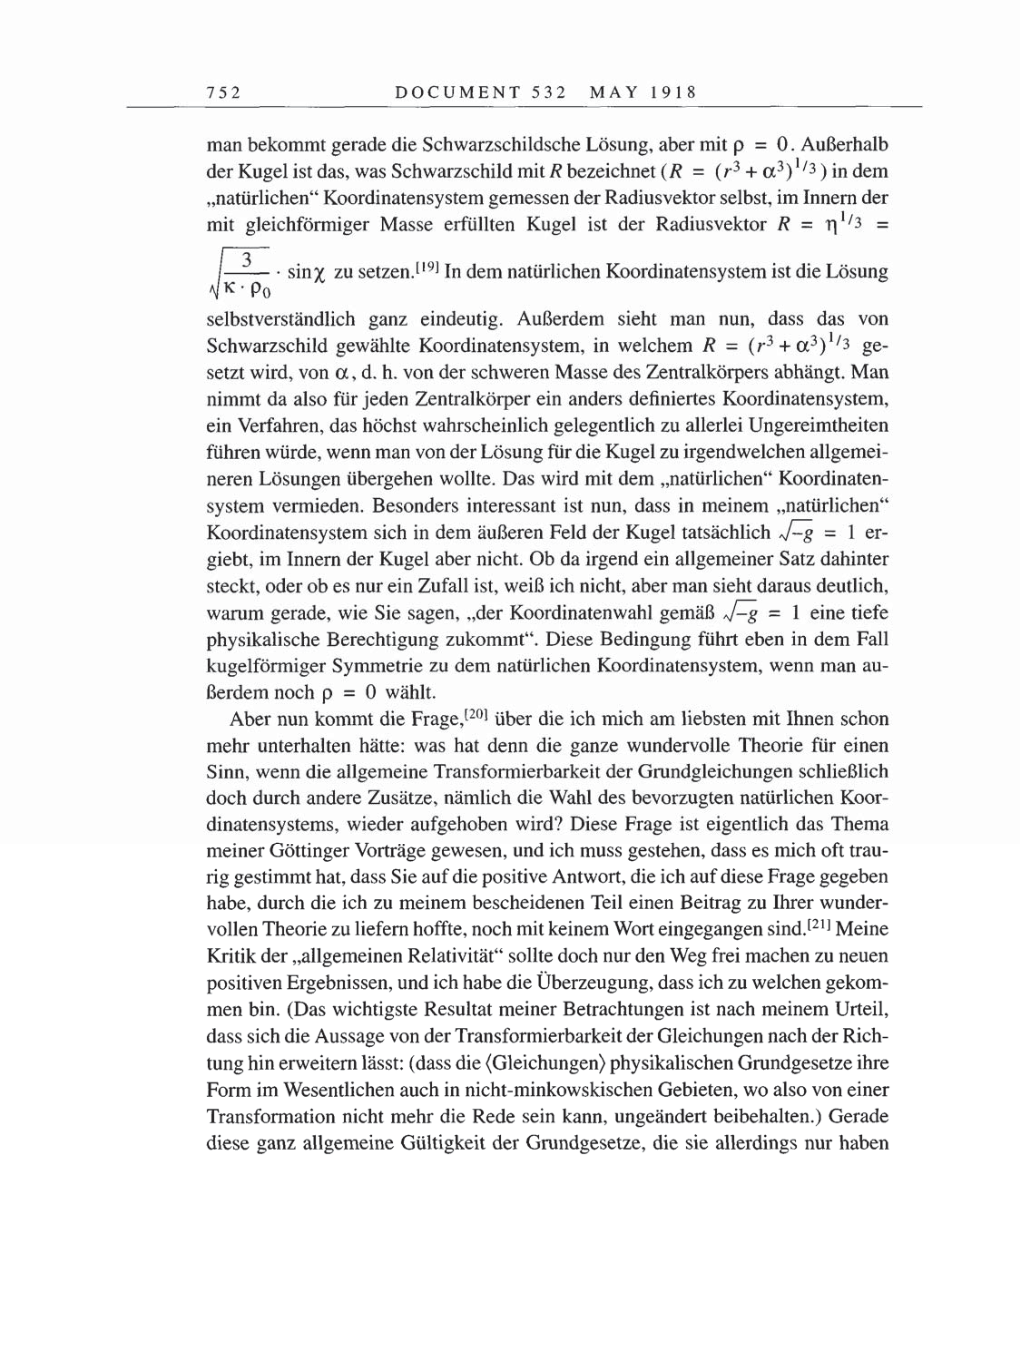 Volume 8, Part B: The Berlin Years: Correspondence 1918 page 752